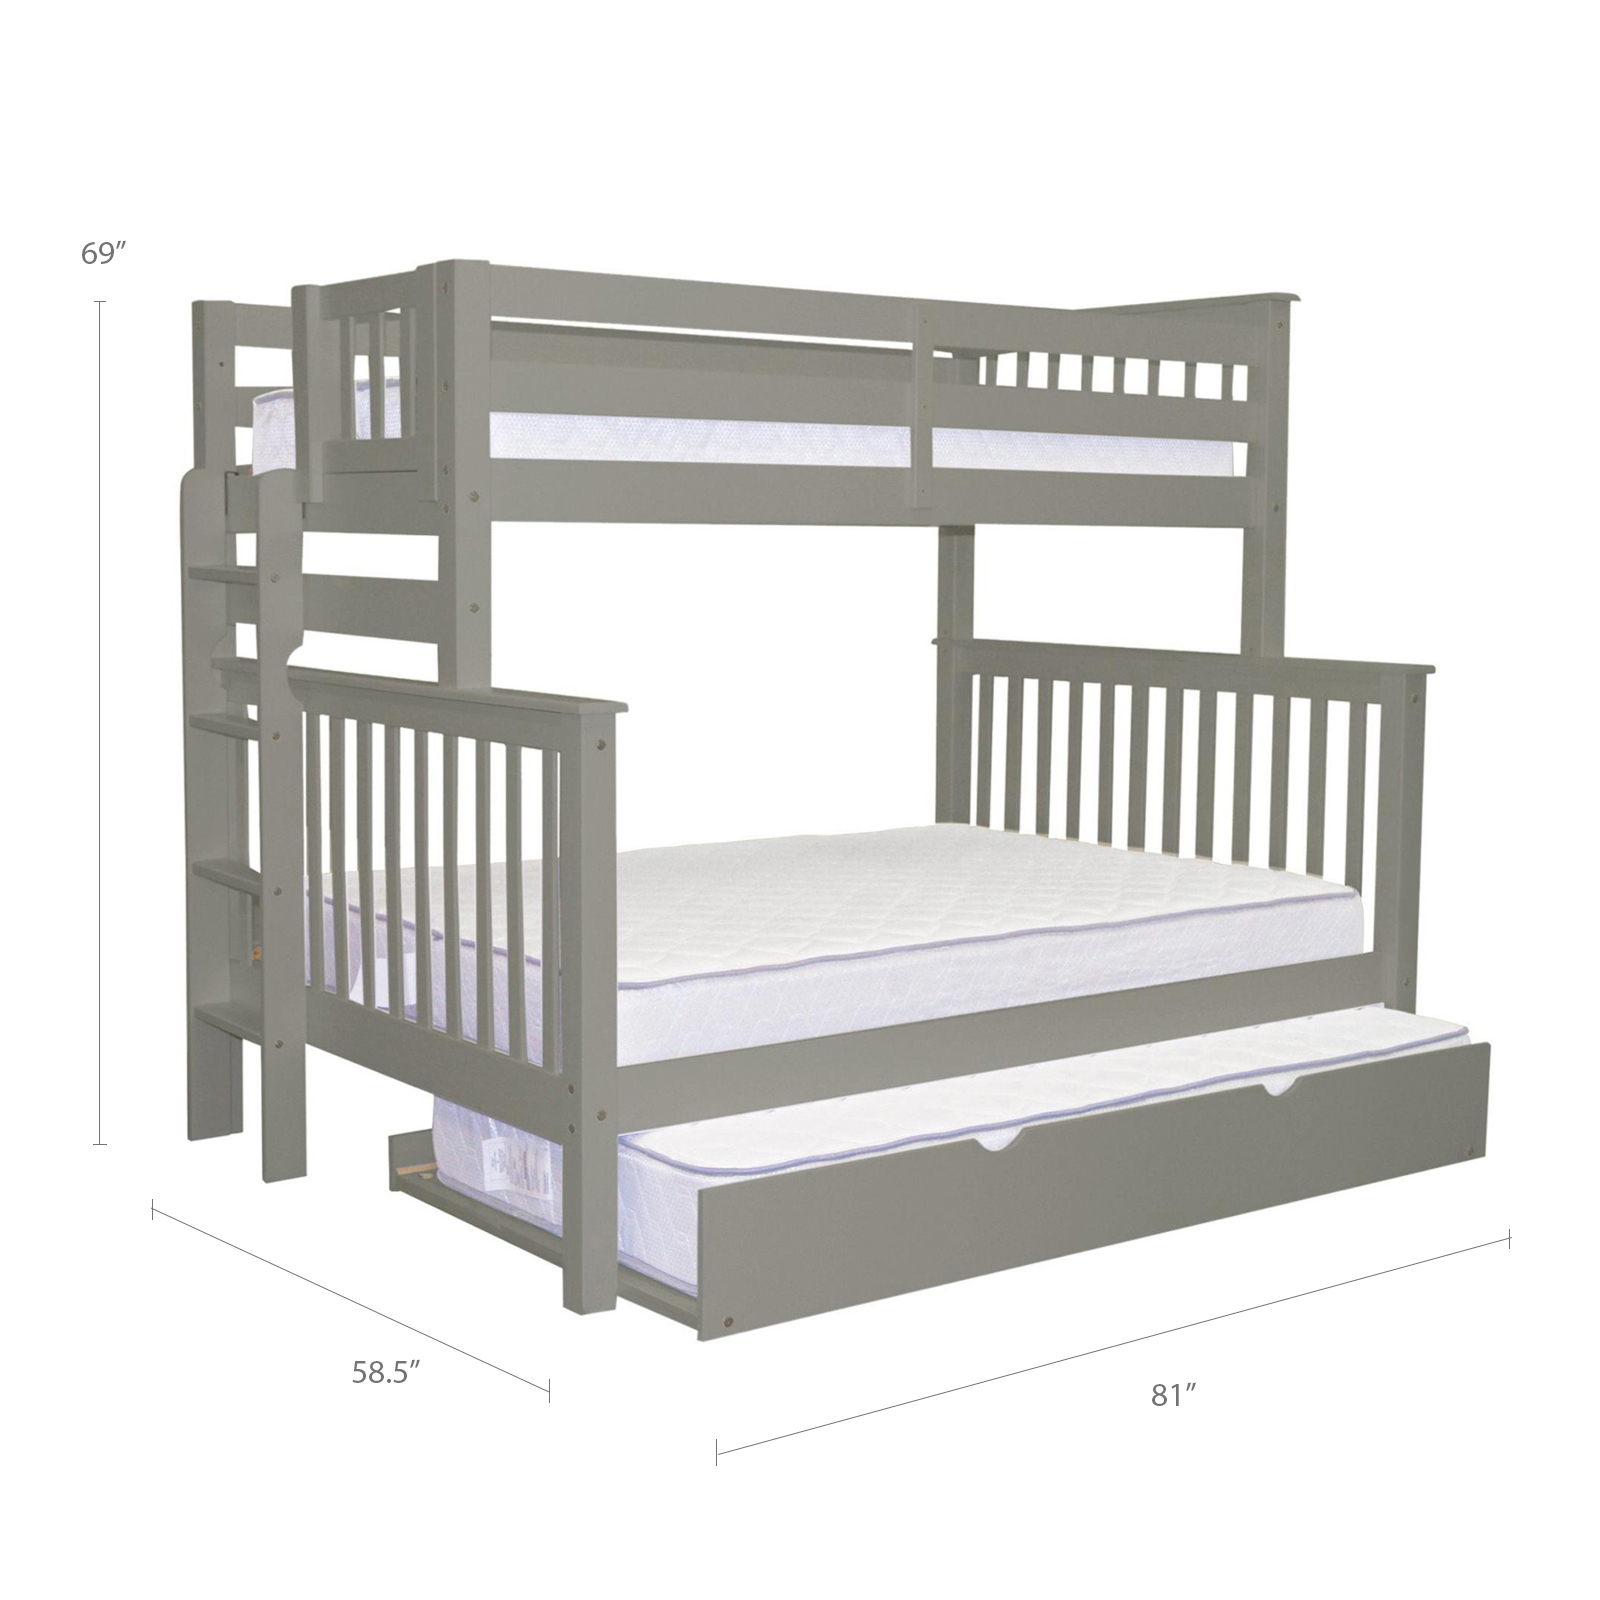 Bedz King Mission Style Twin Over Full, Sears Wooden Bunk Beds